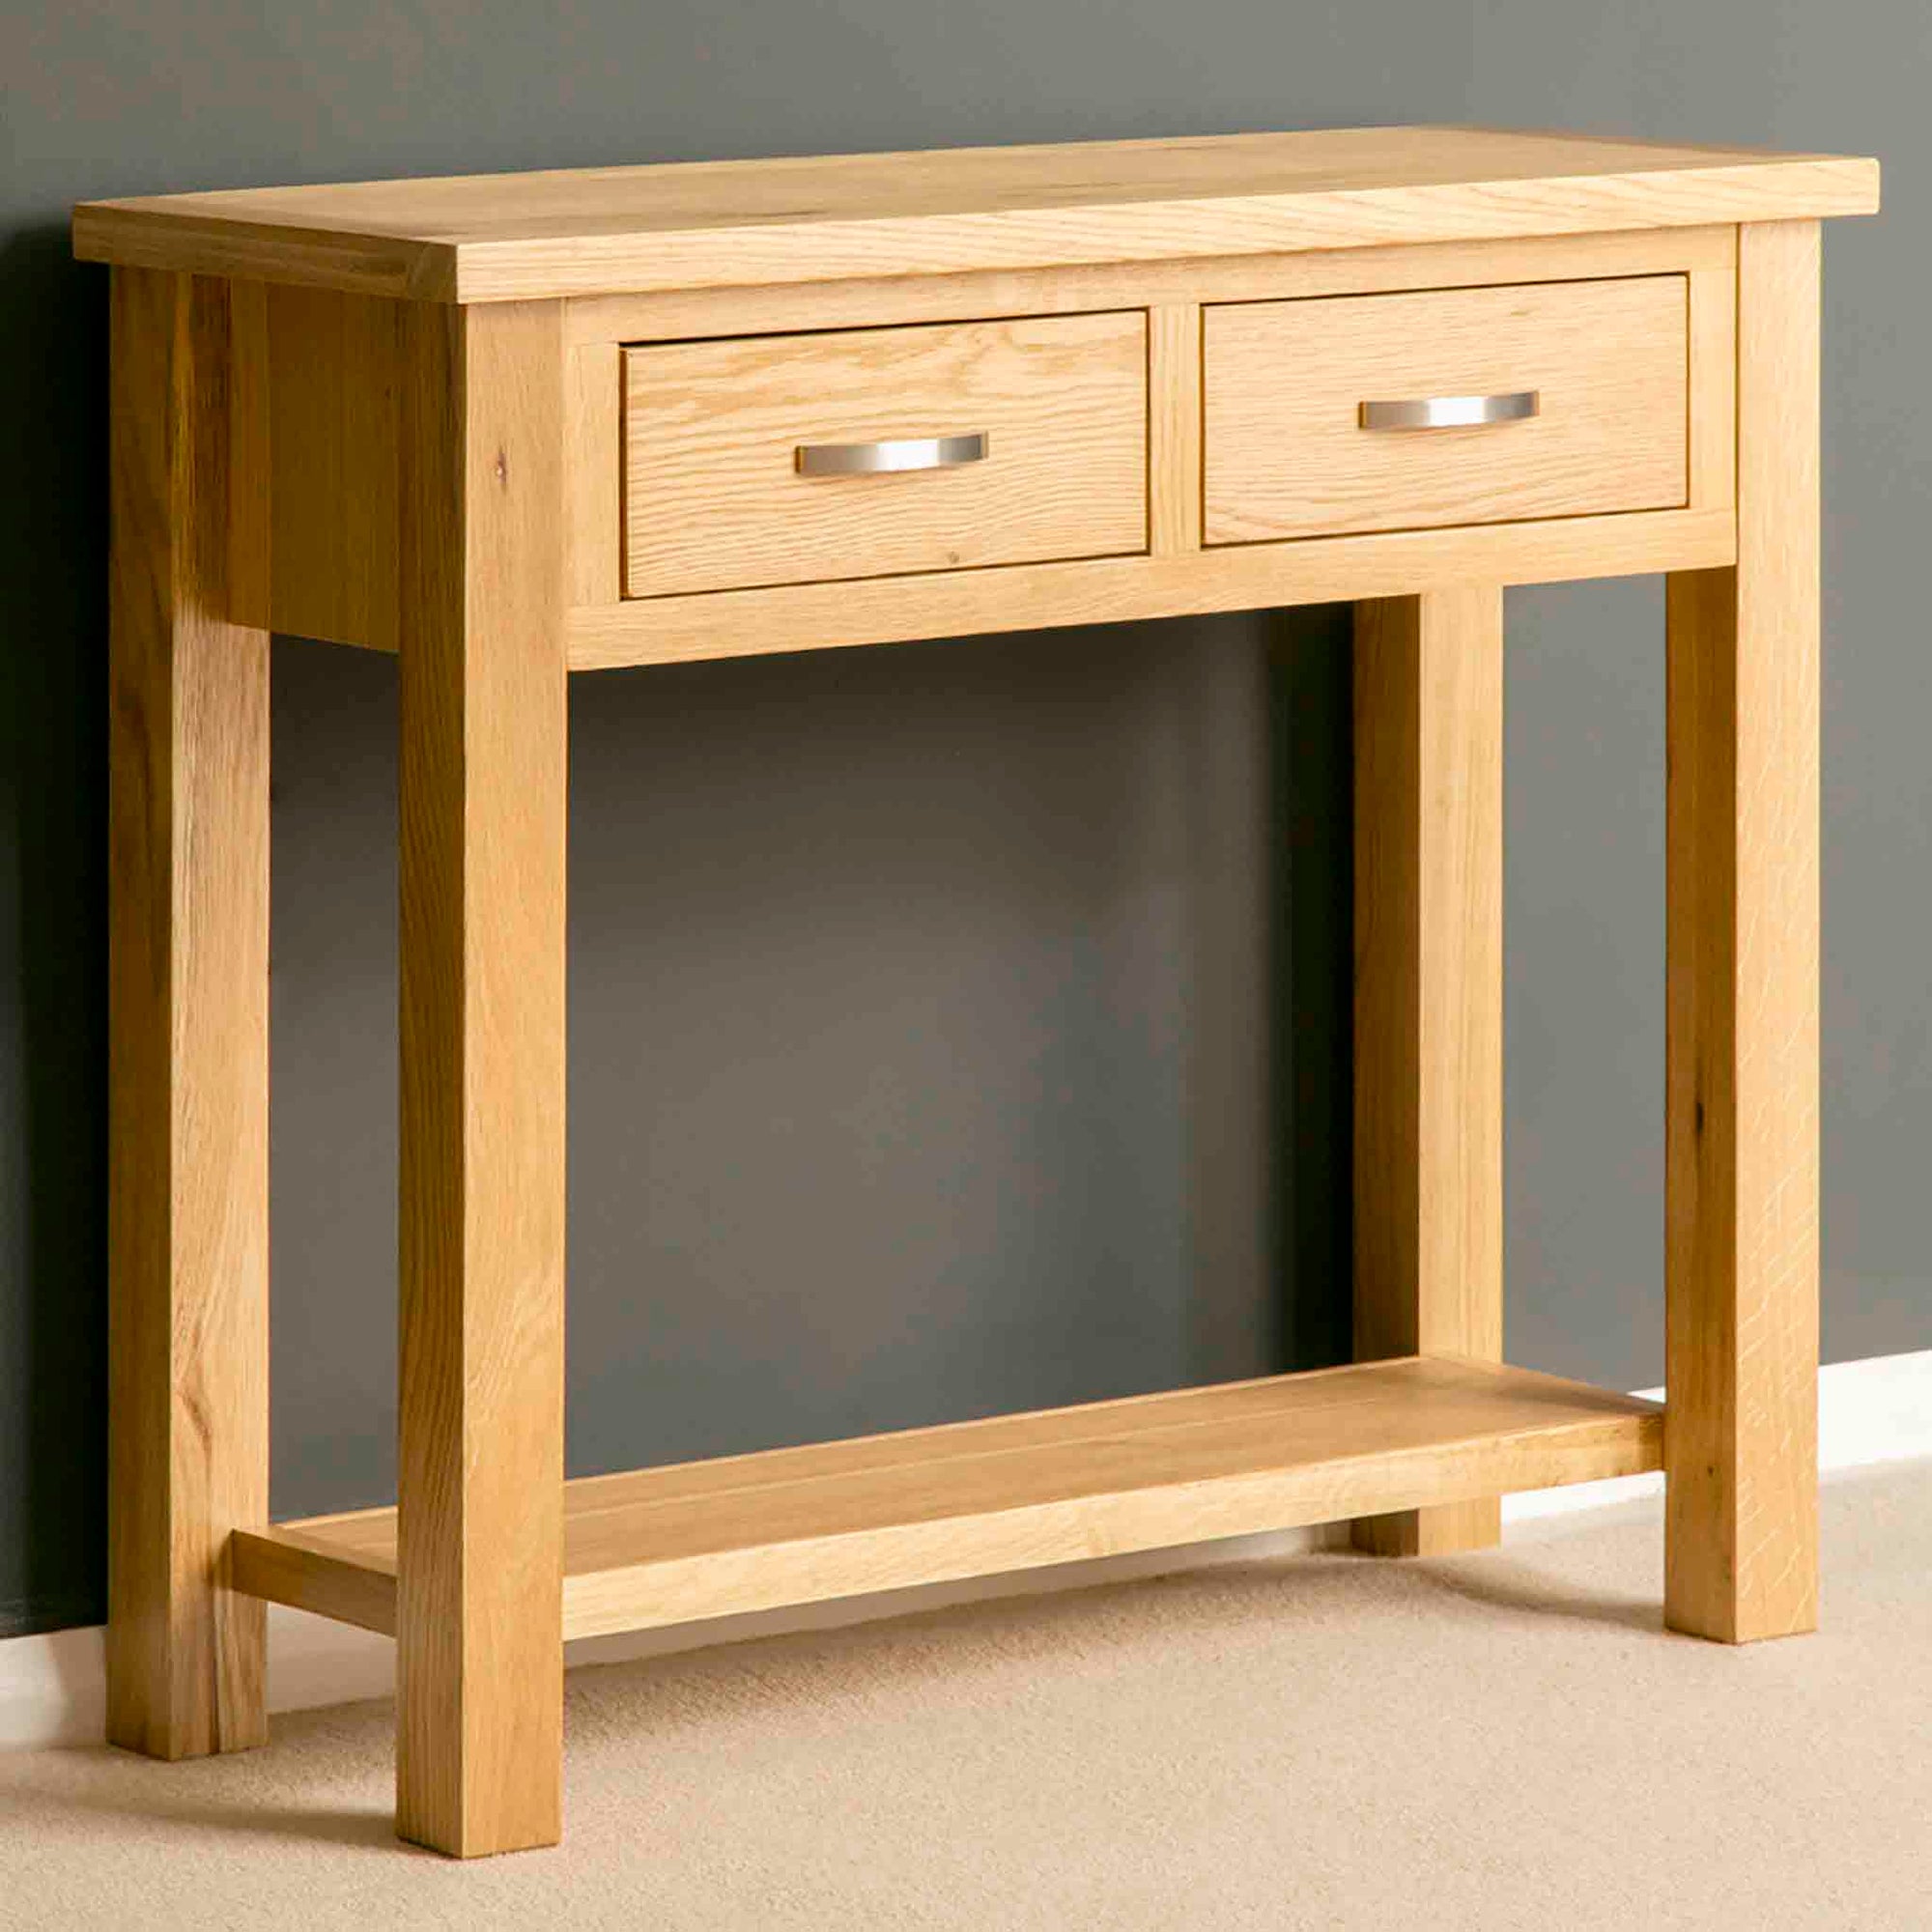 London Oak Large Console Table With 2 Drawers